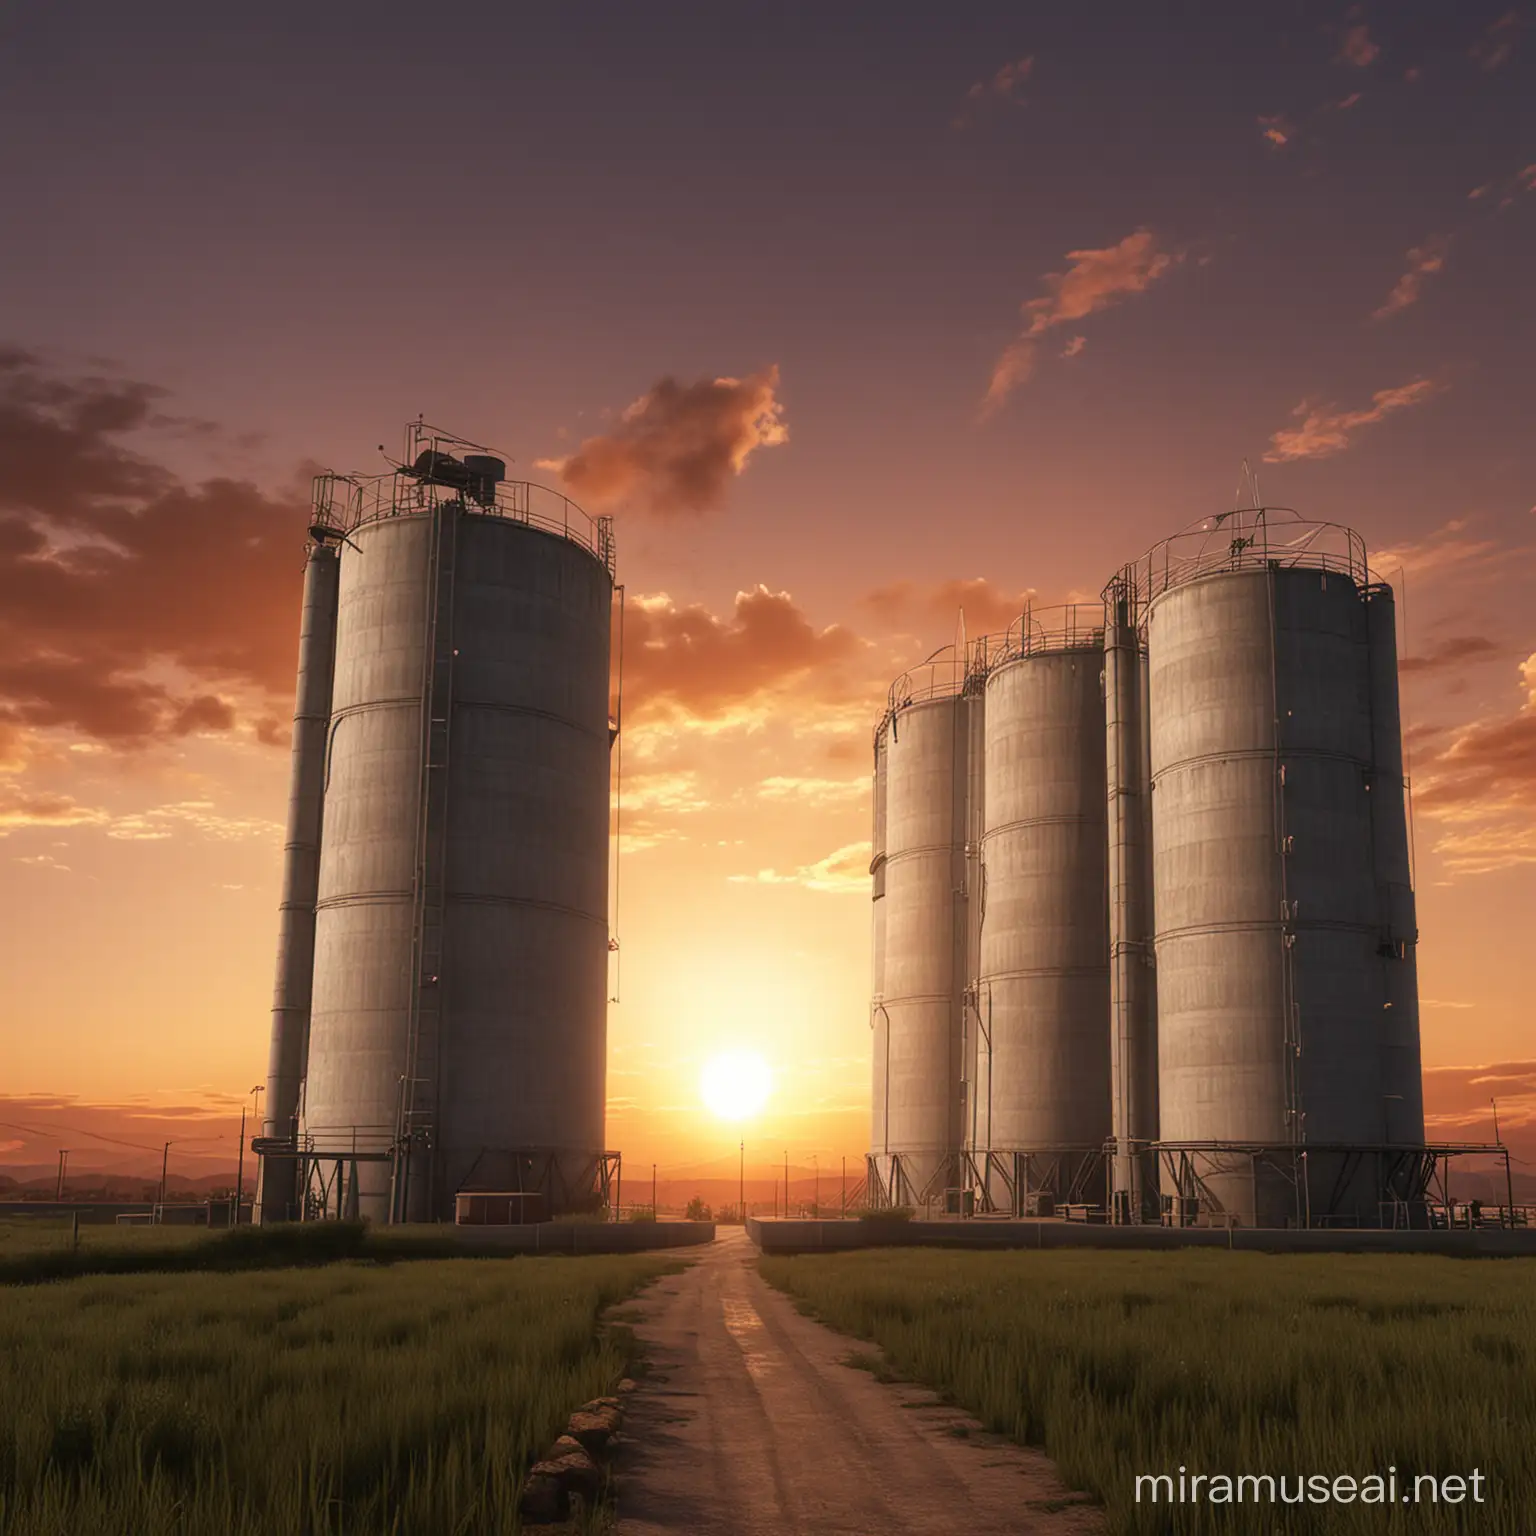 ICBM silos in a remote location, sunset ambience, HD, realistic